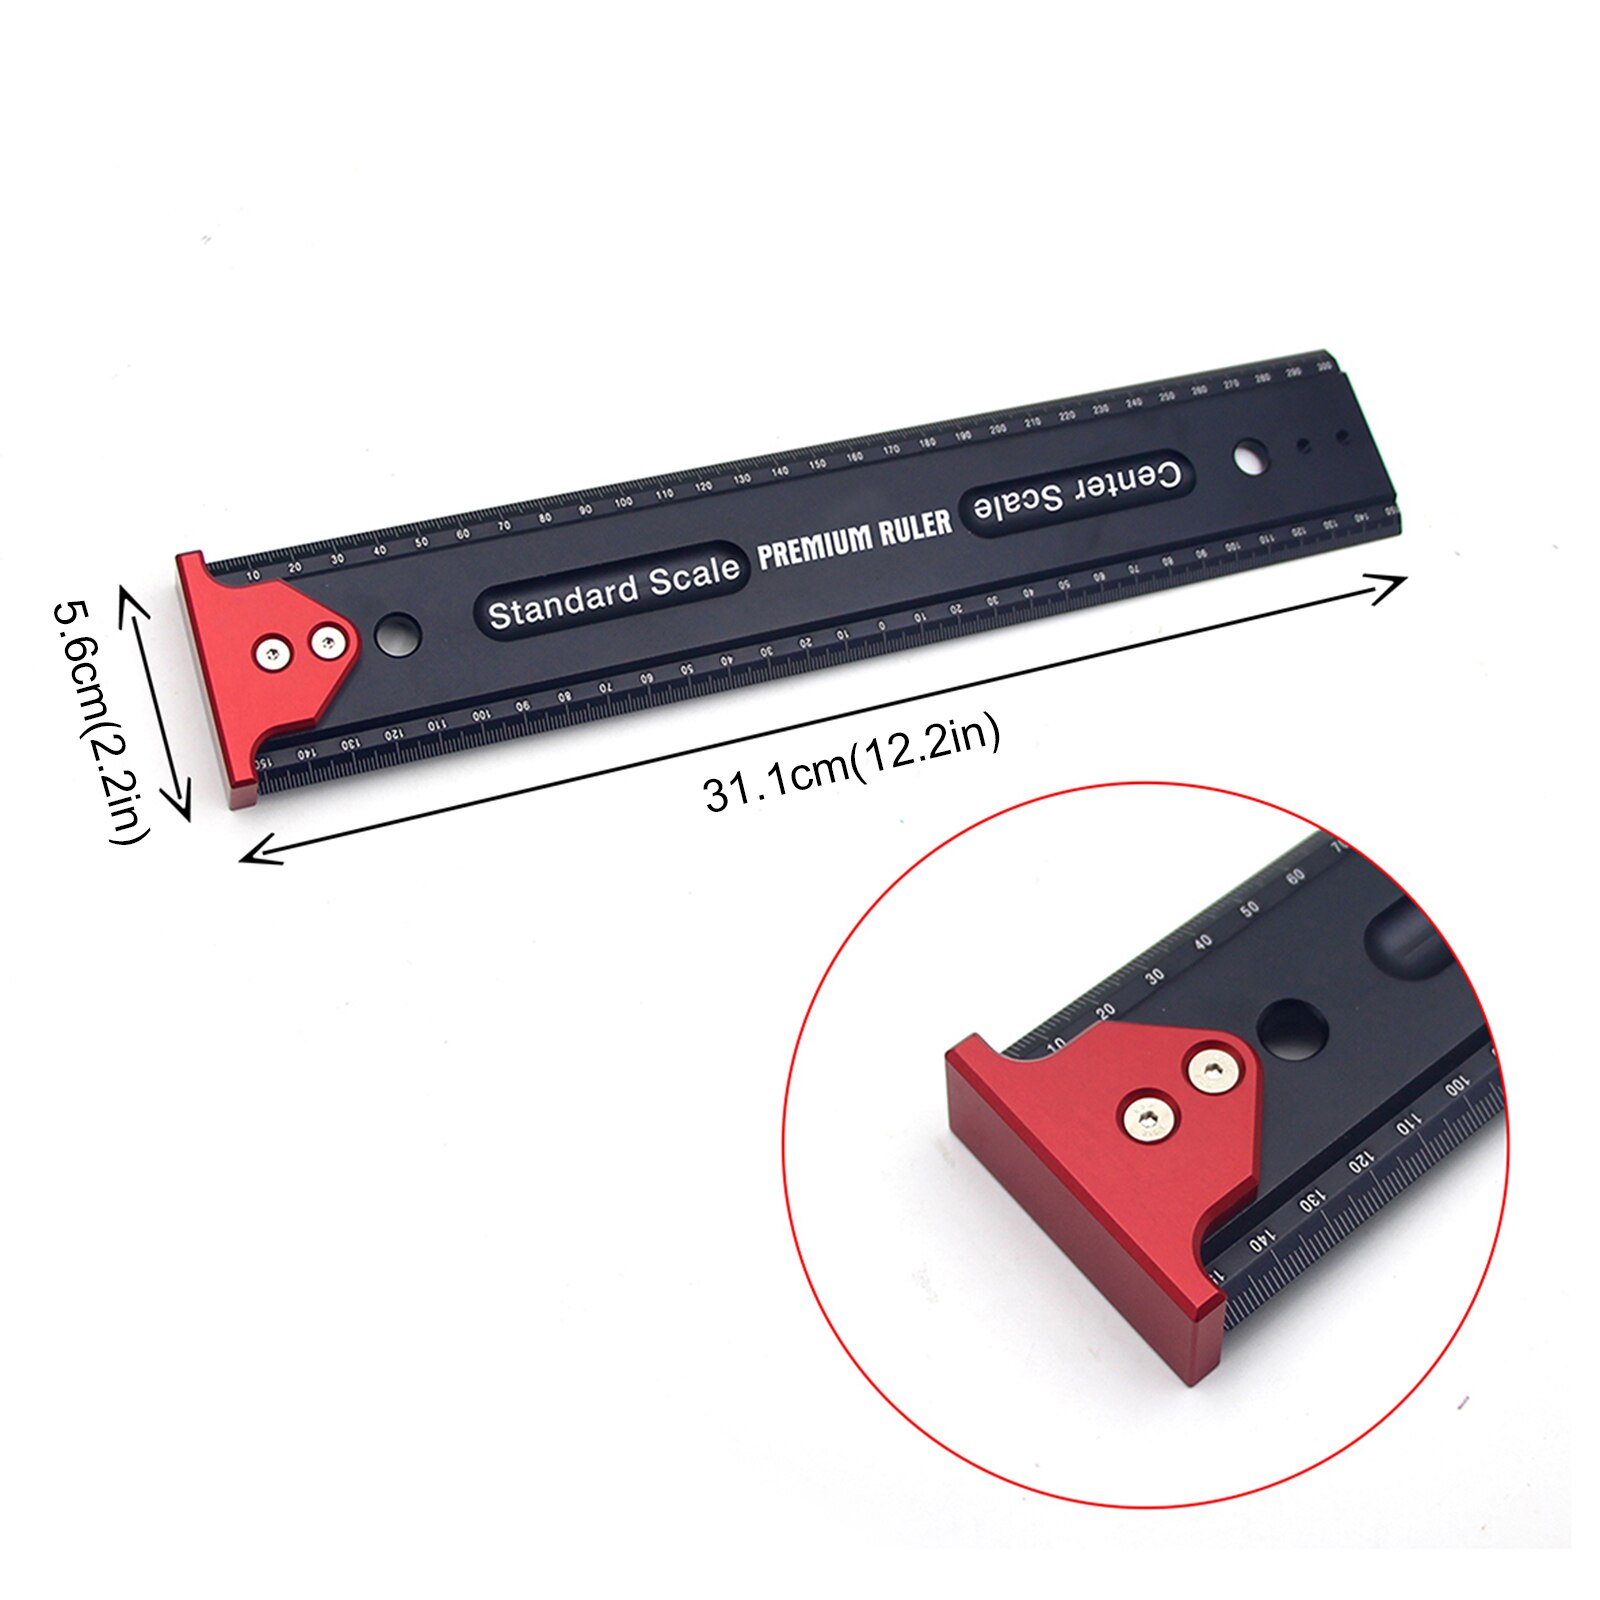 Measuring Ruler With Hook Stop Standard Center Scale Level High Precision Ruler Durable Portable Home Woodworking Tools